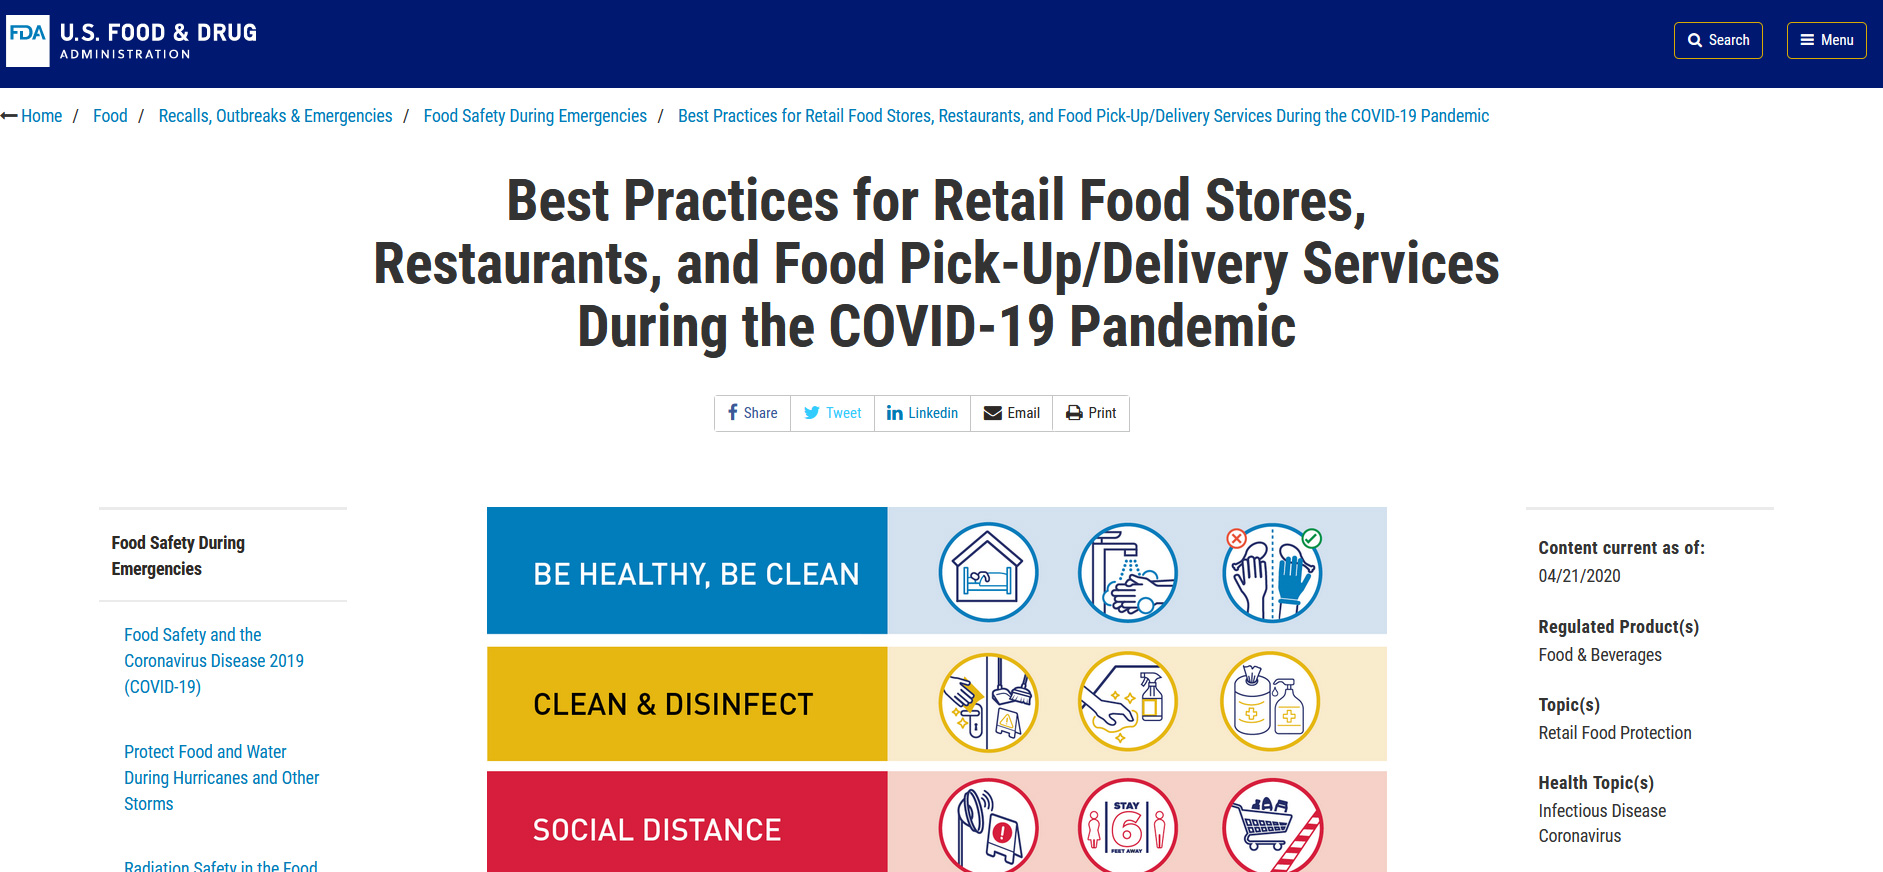 Best Practices - Retail Food Stores During the COVID-19 Pandemic